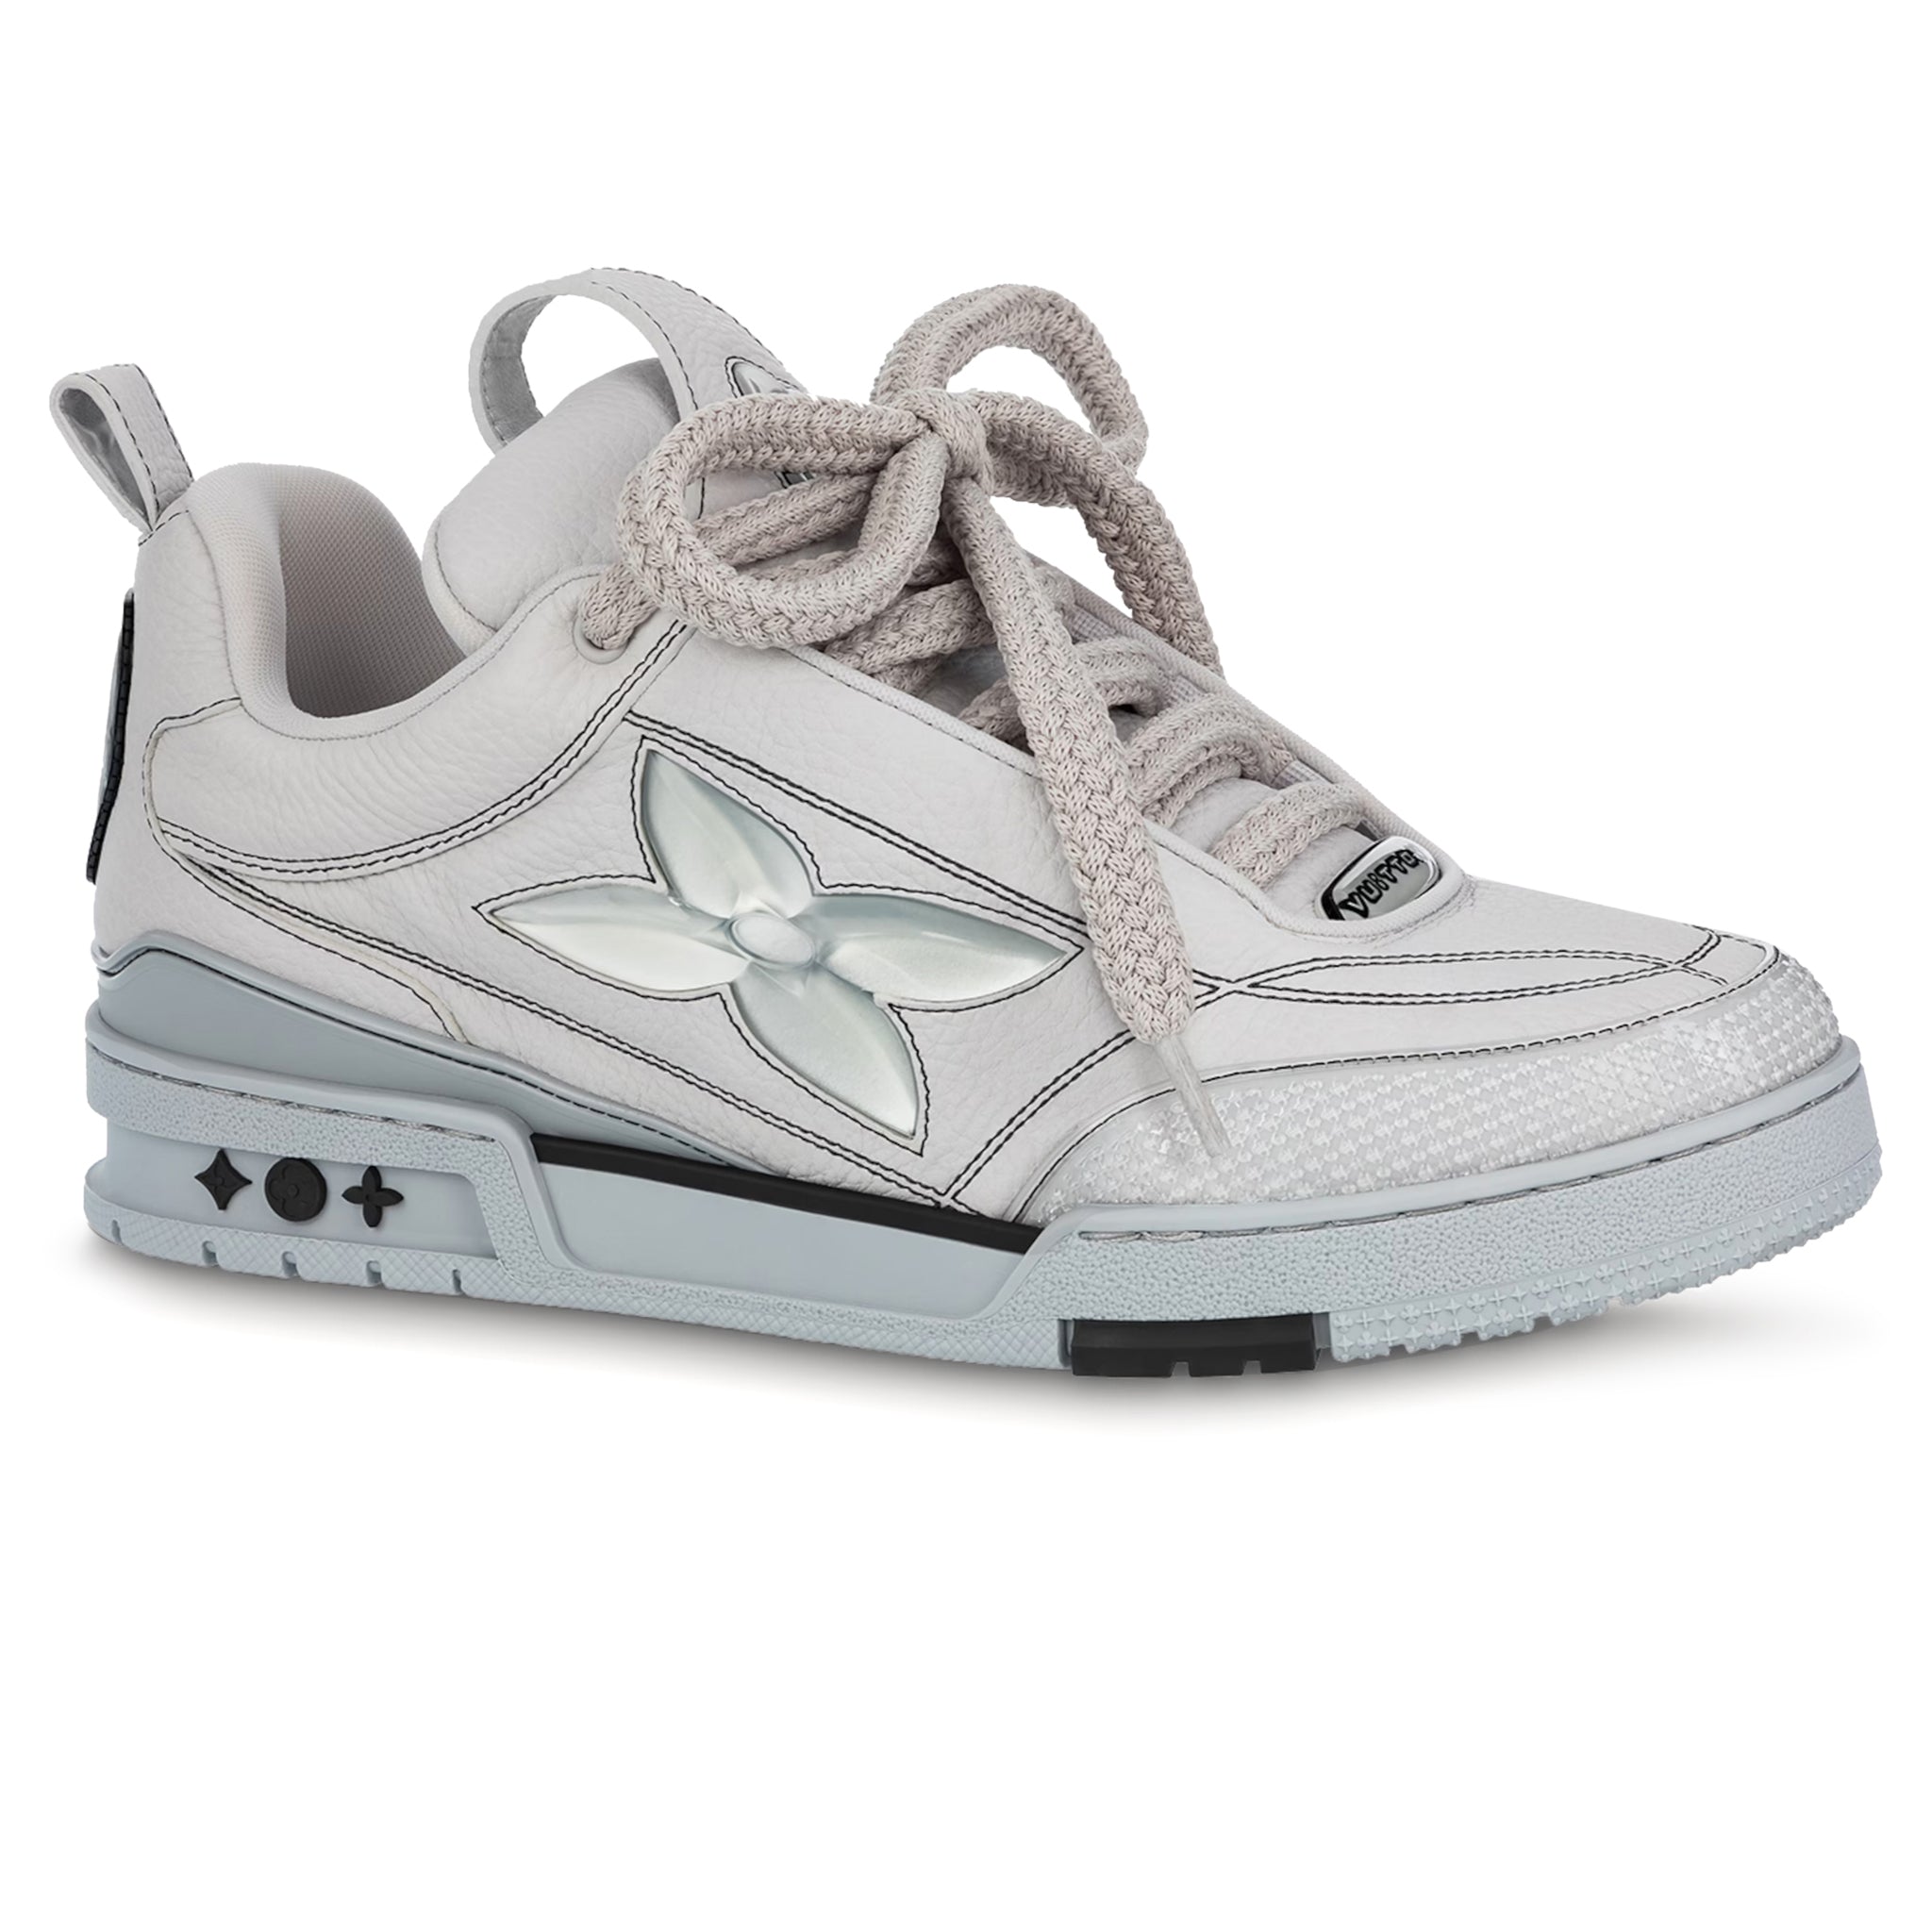 Low trainers Louis Vuitton Grey size 8 US in Rubber - 27916035